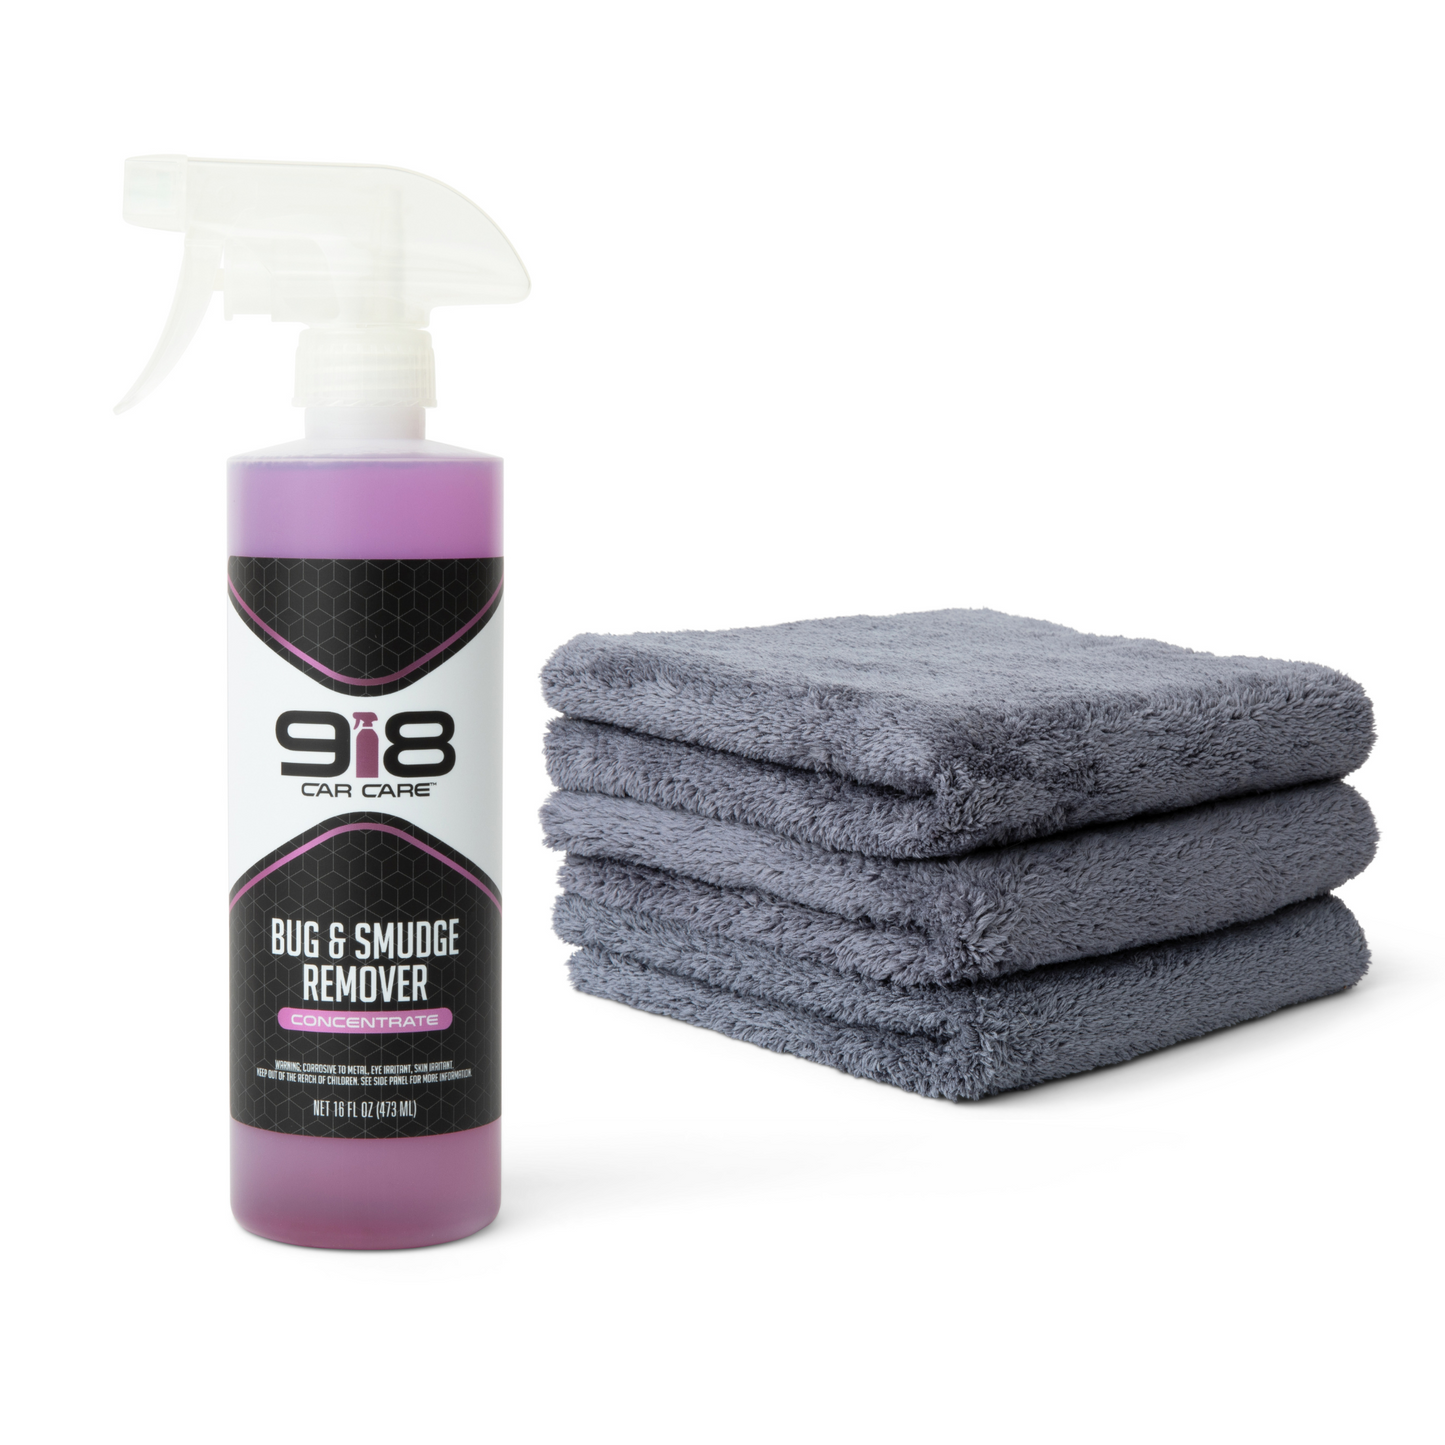 Bug & Smudge Remover [Concentrate] - Towel Combo